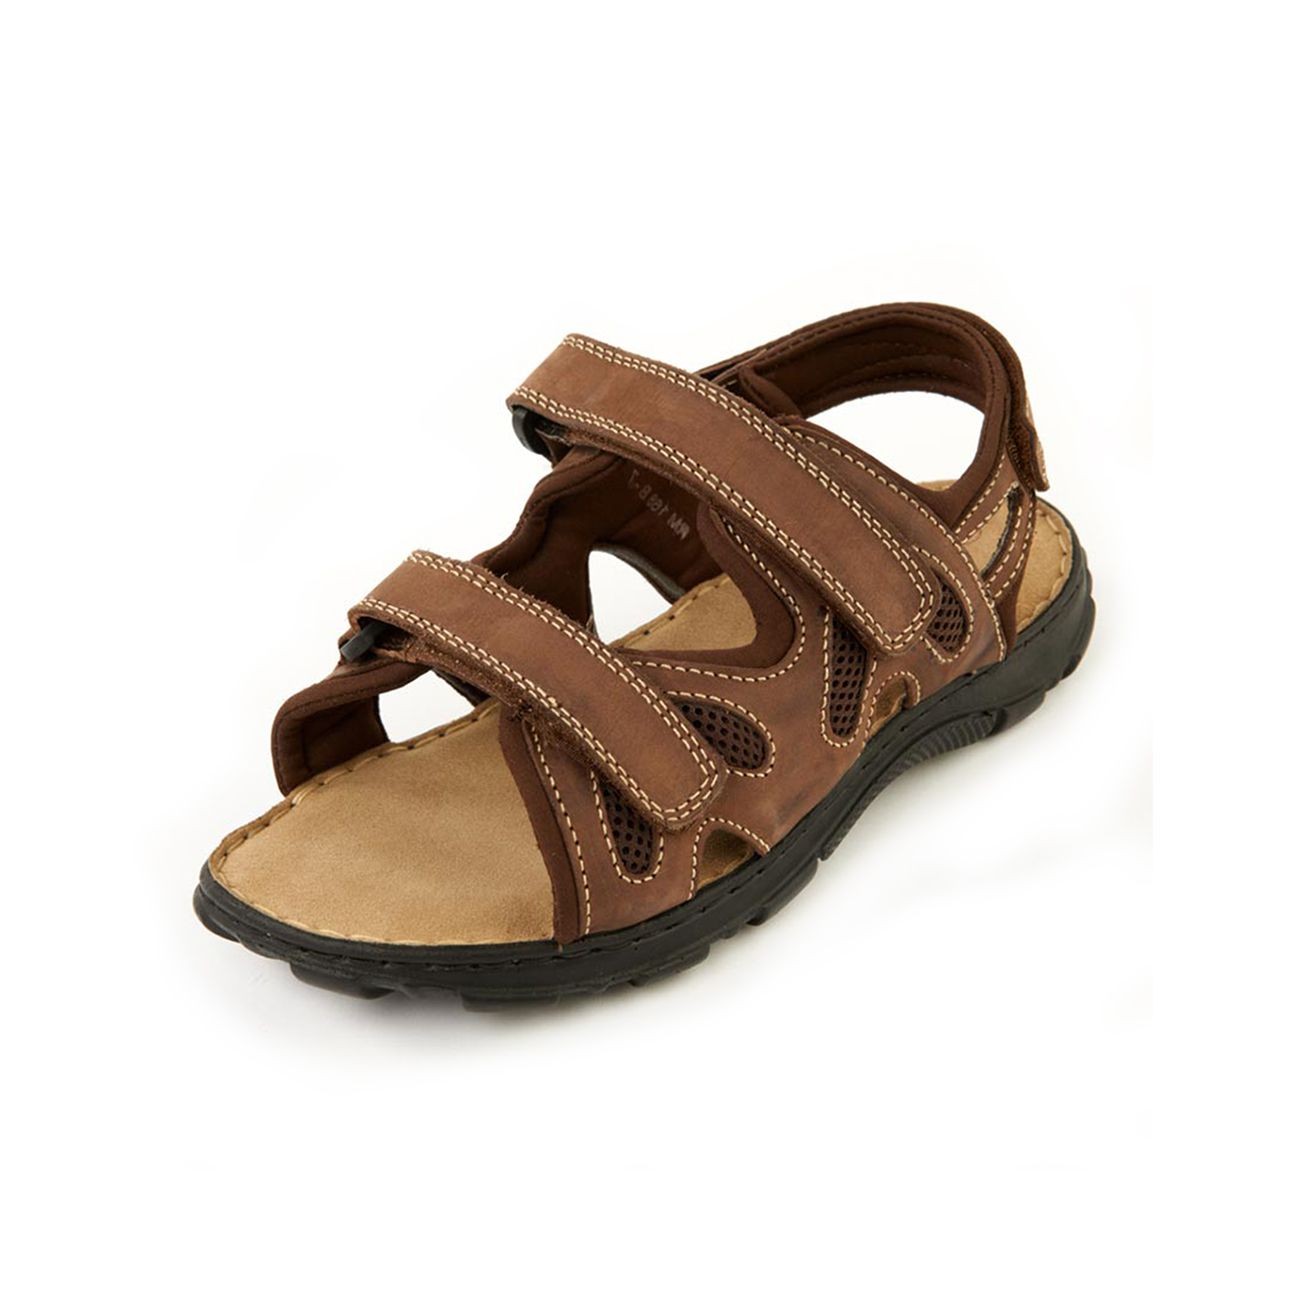 Neil Roomy Sandal and men's wider fitting sandals